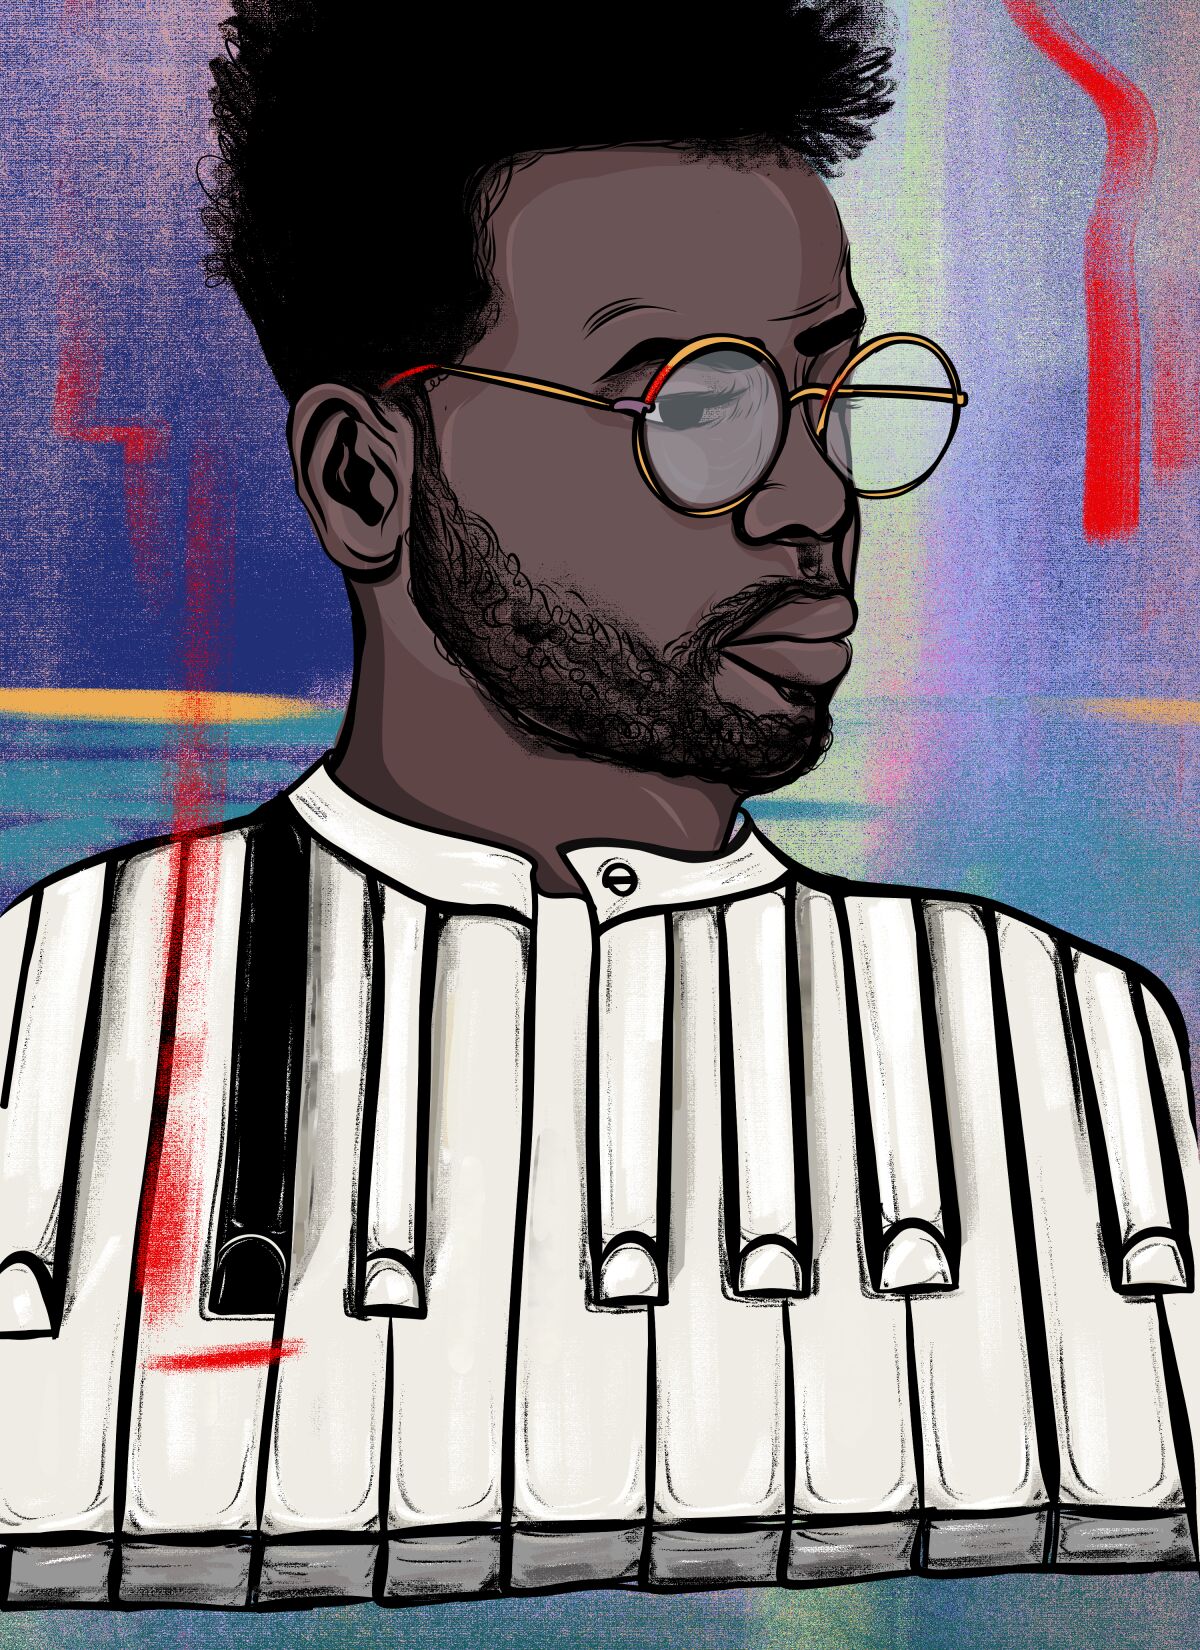 Abstract illustration shows a Black man whose shirt consists of piano keys, only one of which is Black. The rest are white. 